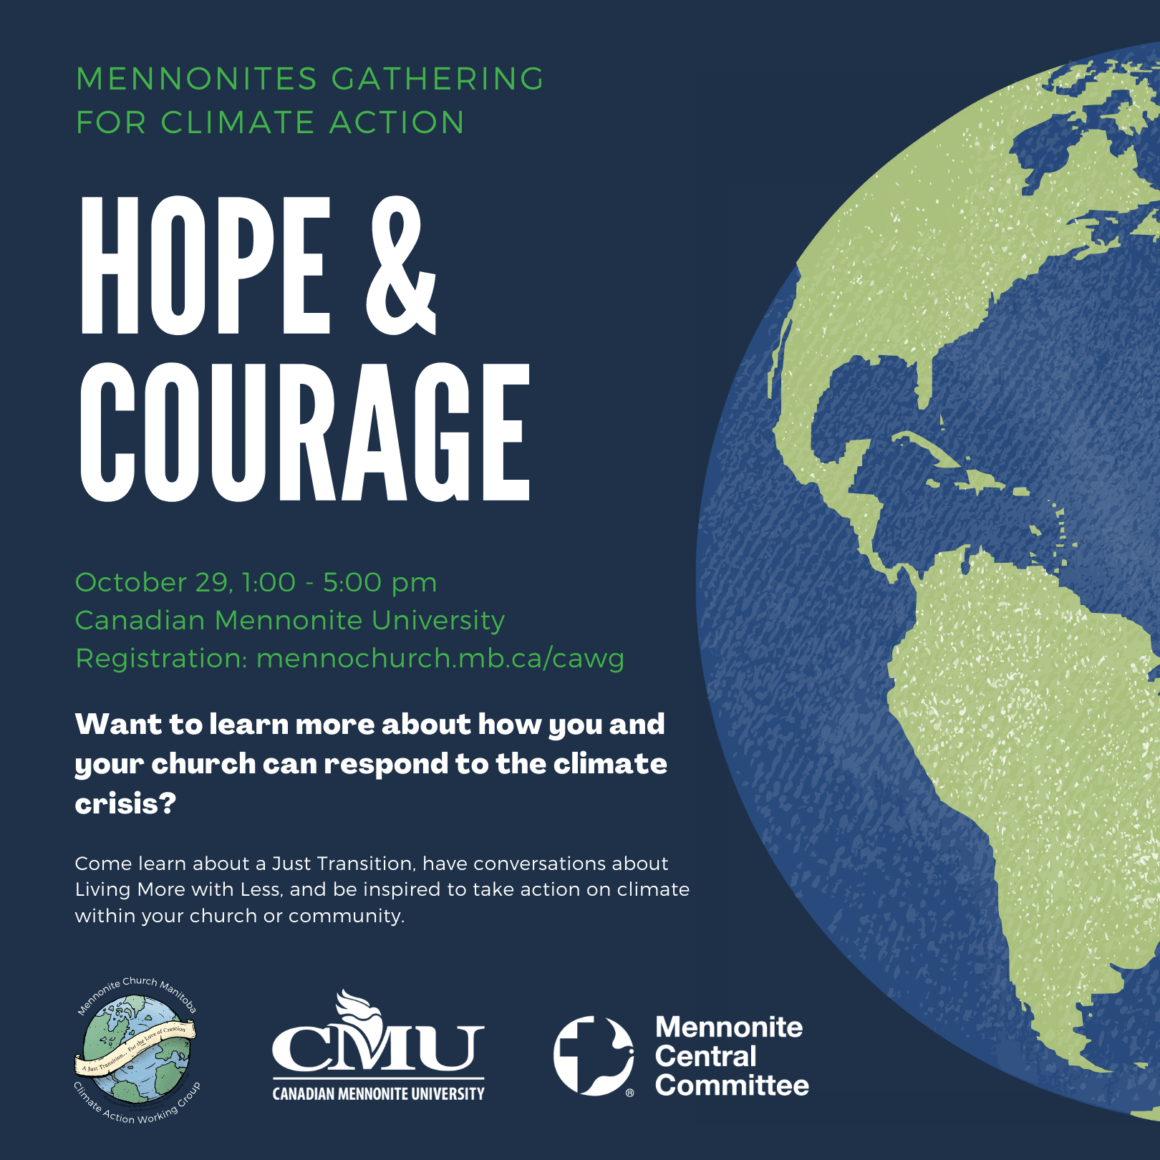 Hope & Courage: Mennonites Gathering for Climate Action – October 29